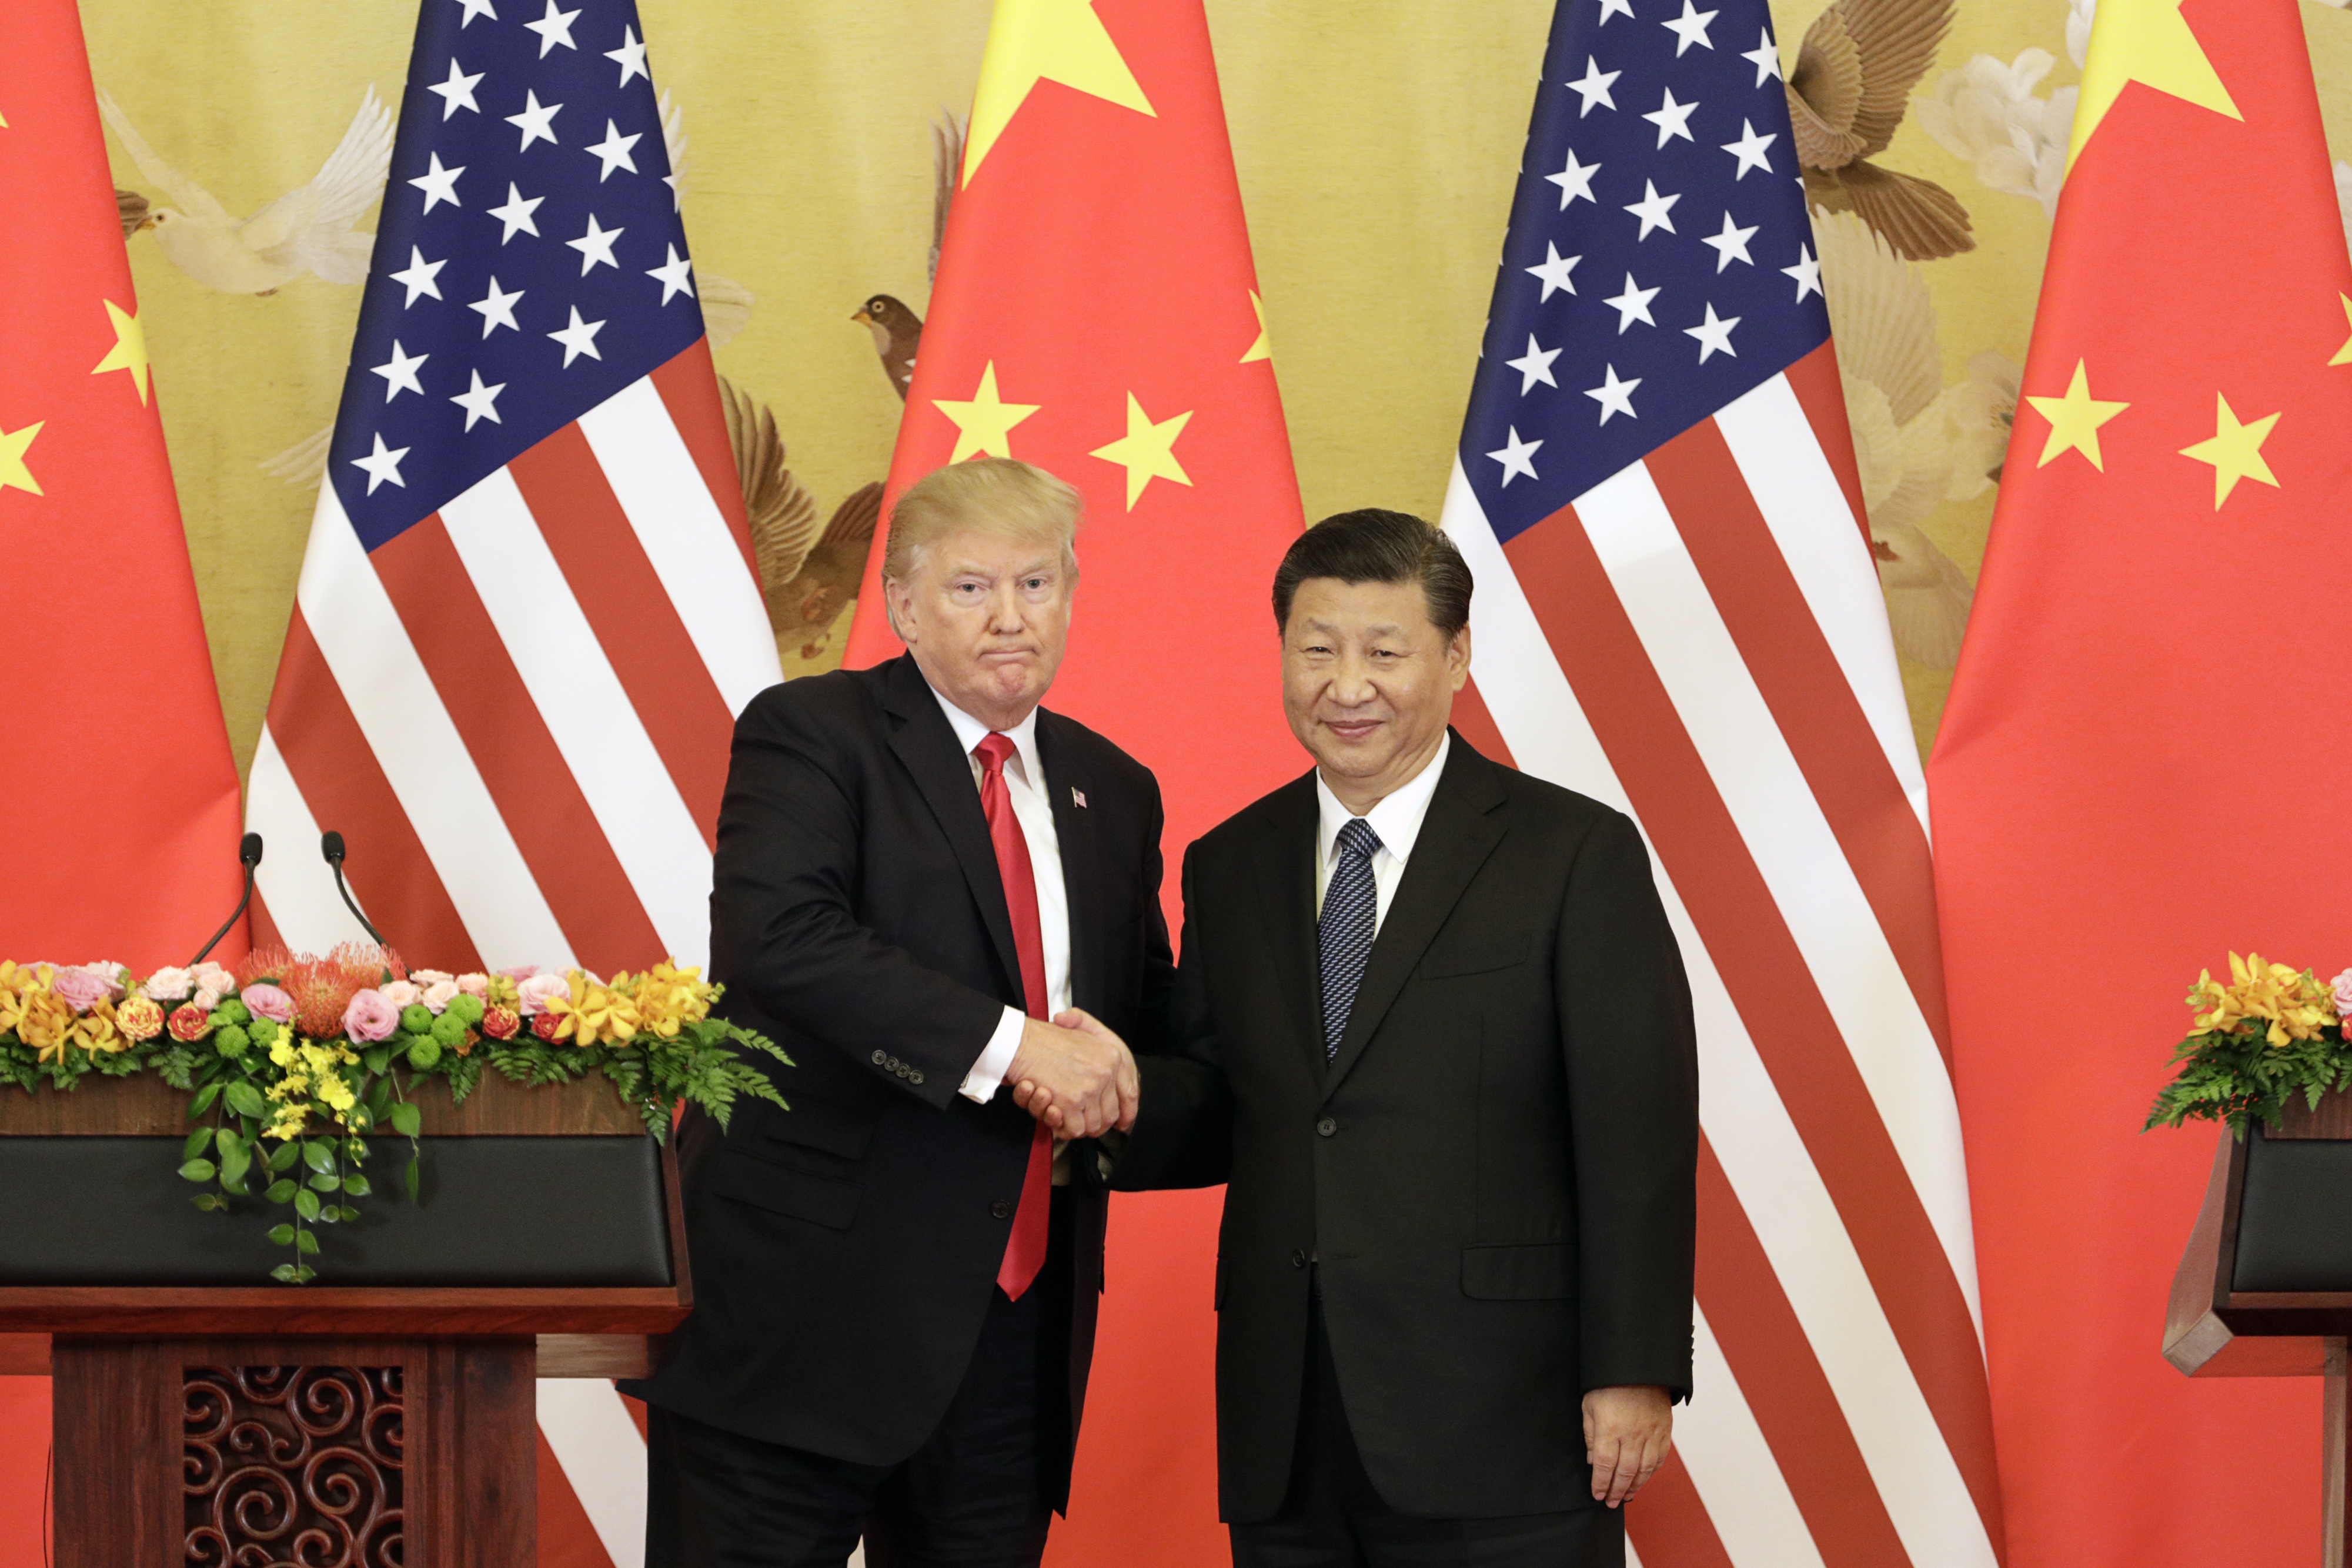 U.S. President Donald Trump And China President Xi Jinping Deliver Press Statement